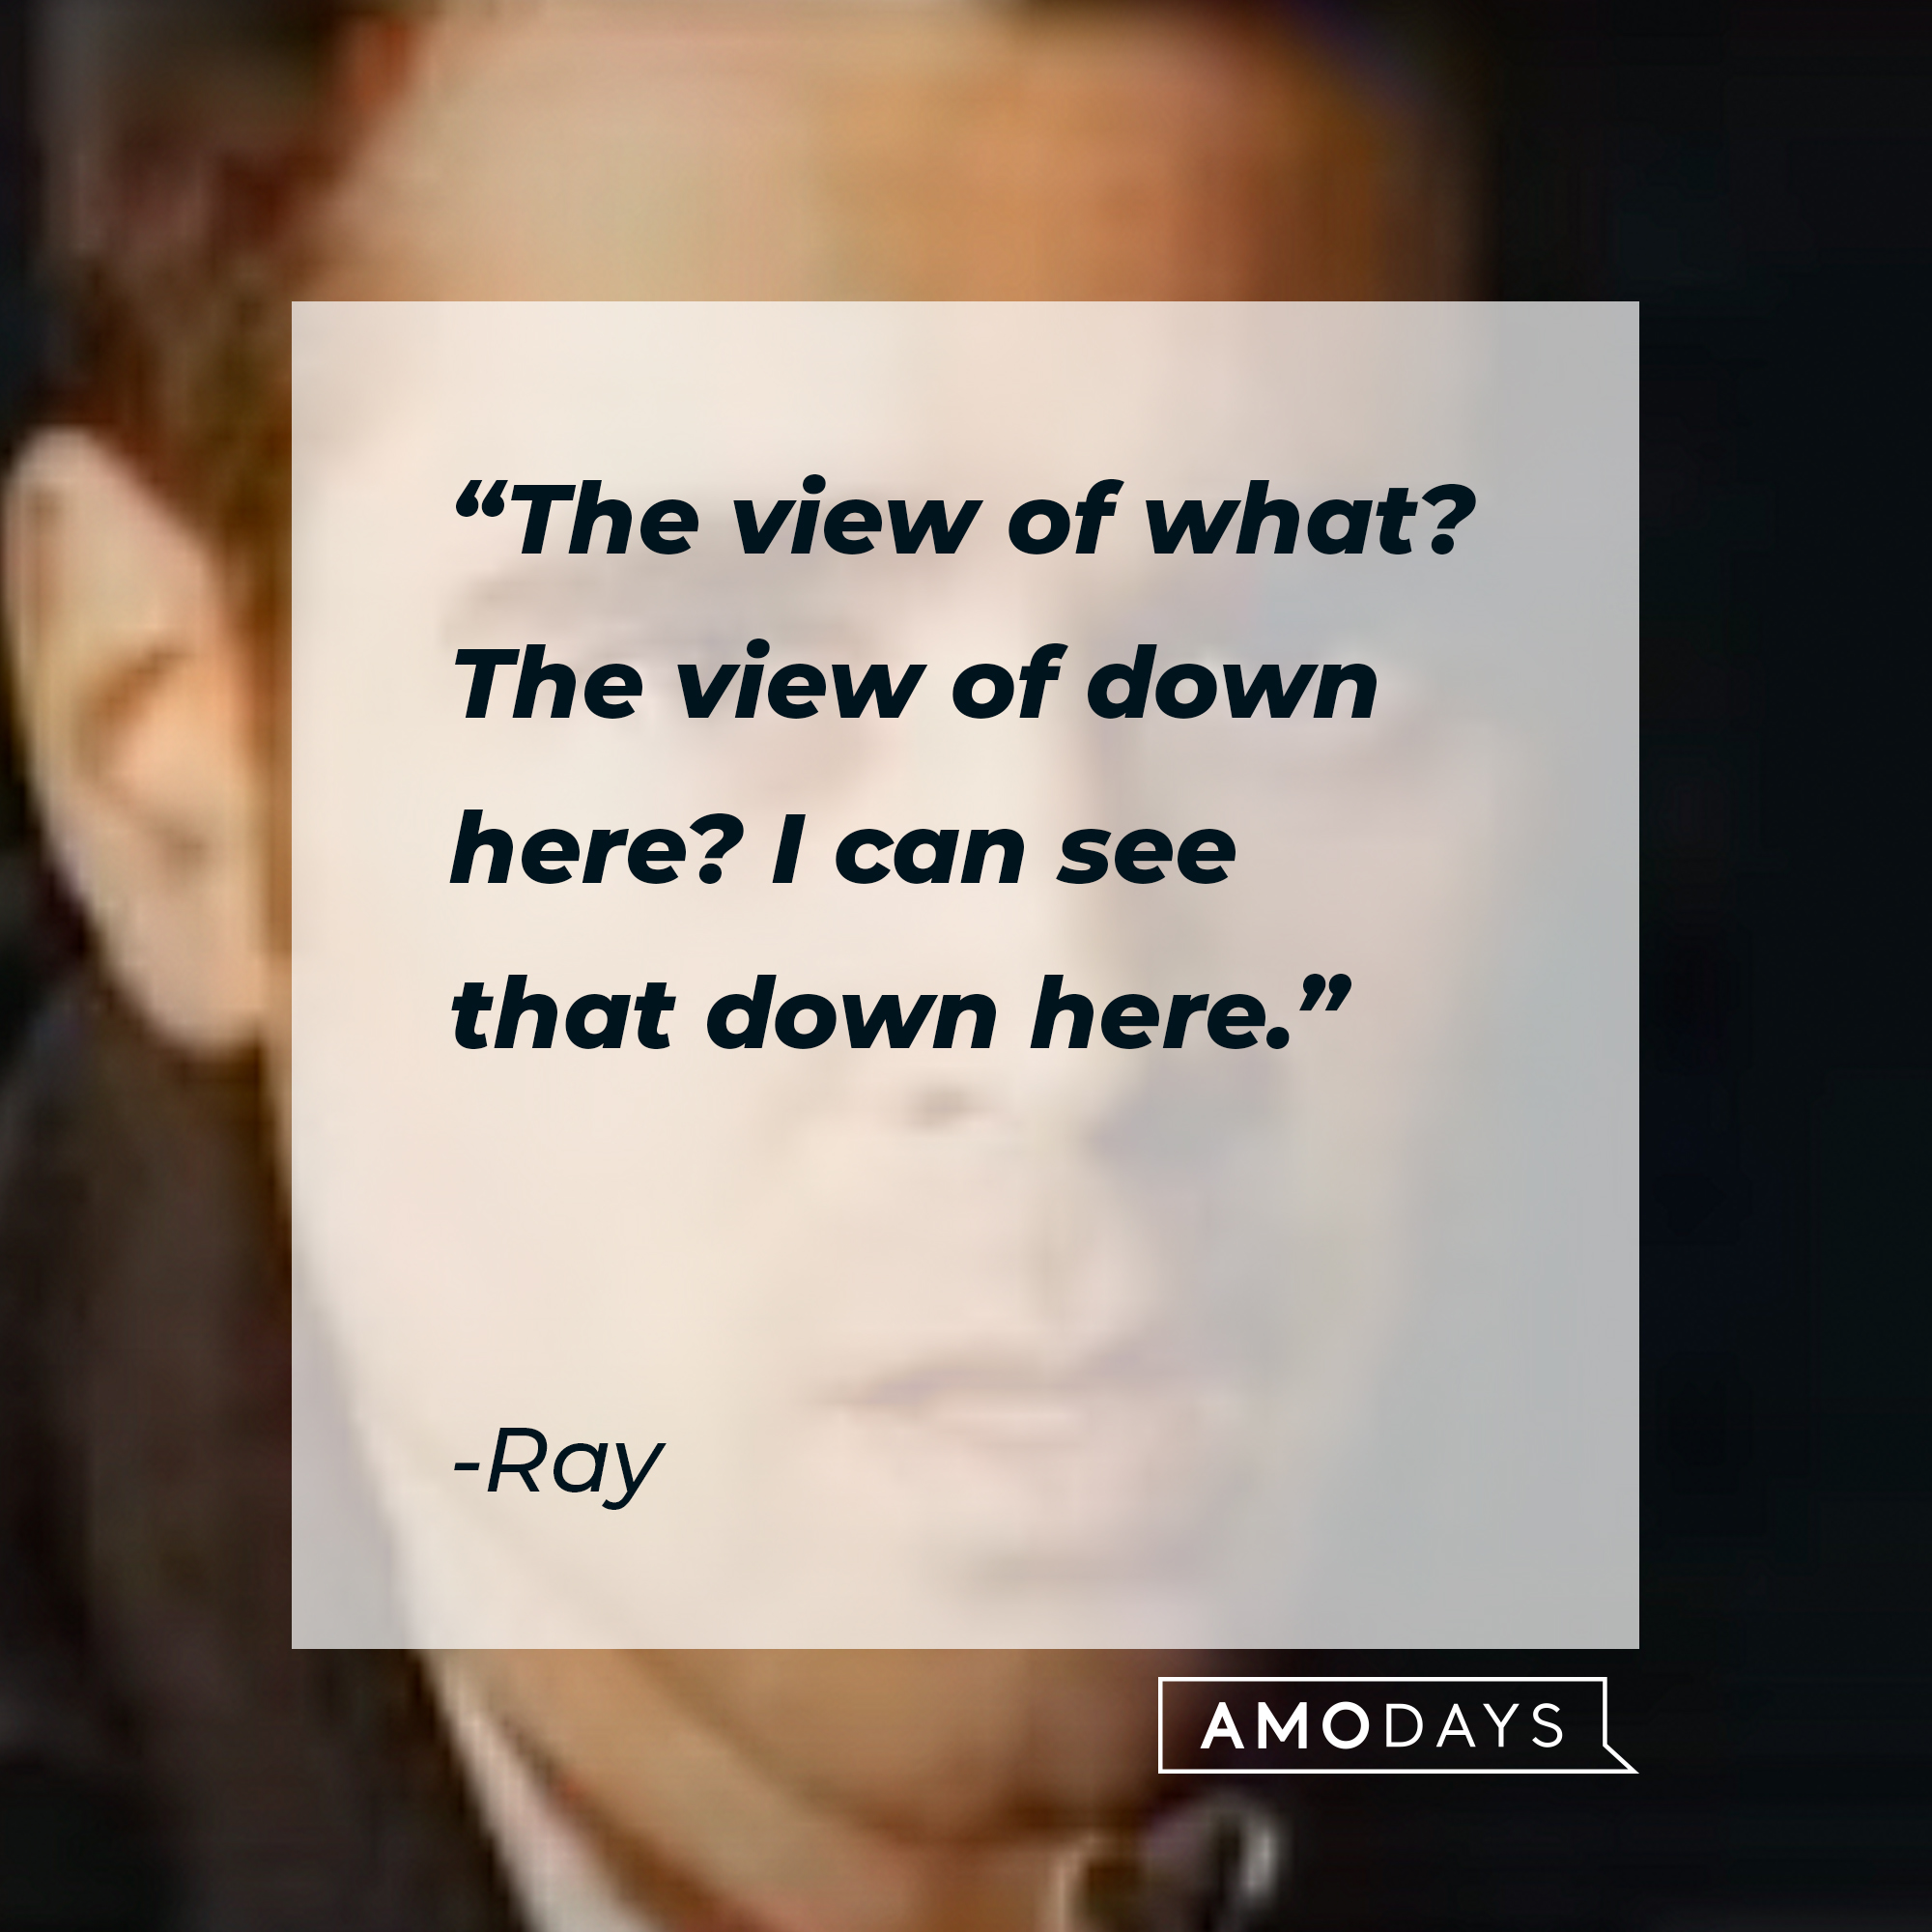 Ray, with his quote: "The view of what? The view of down here? I can see that down here.” | Source: Youtube.com/FocusFeatures